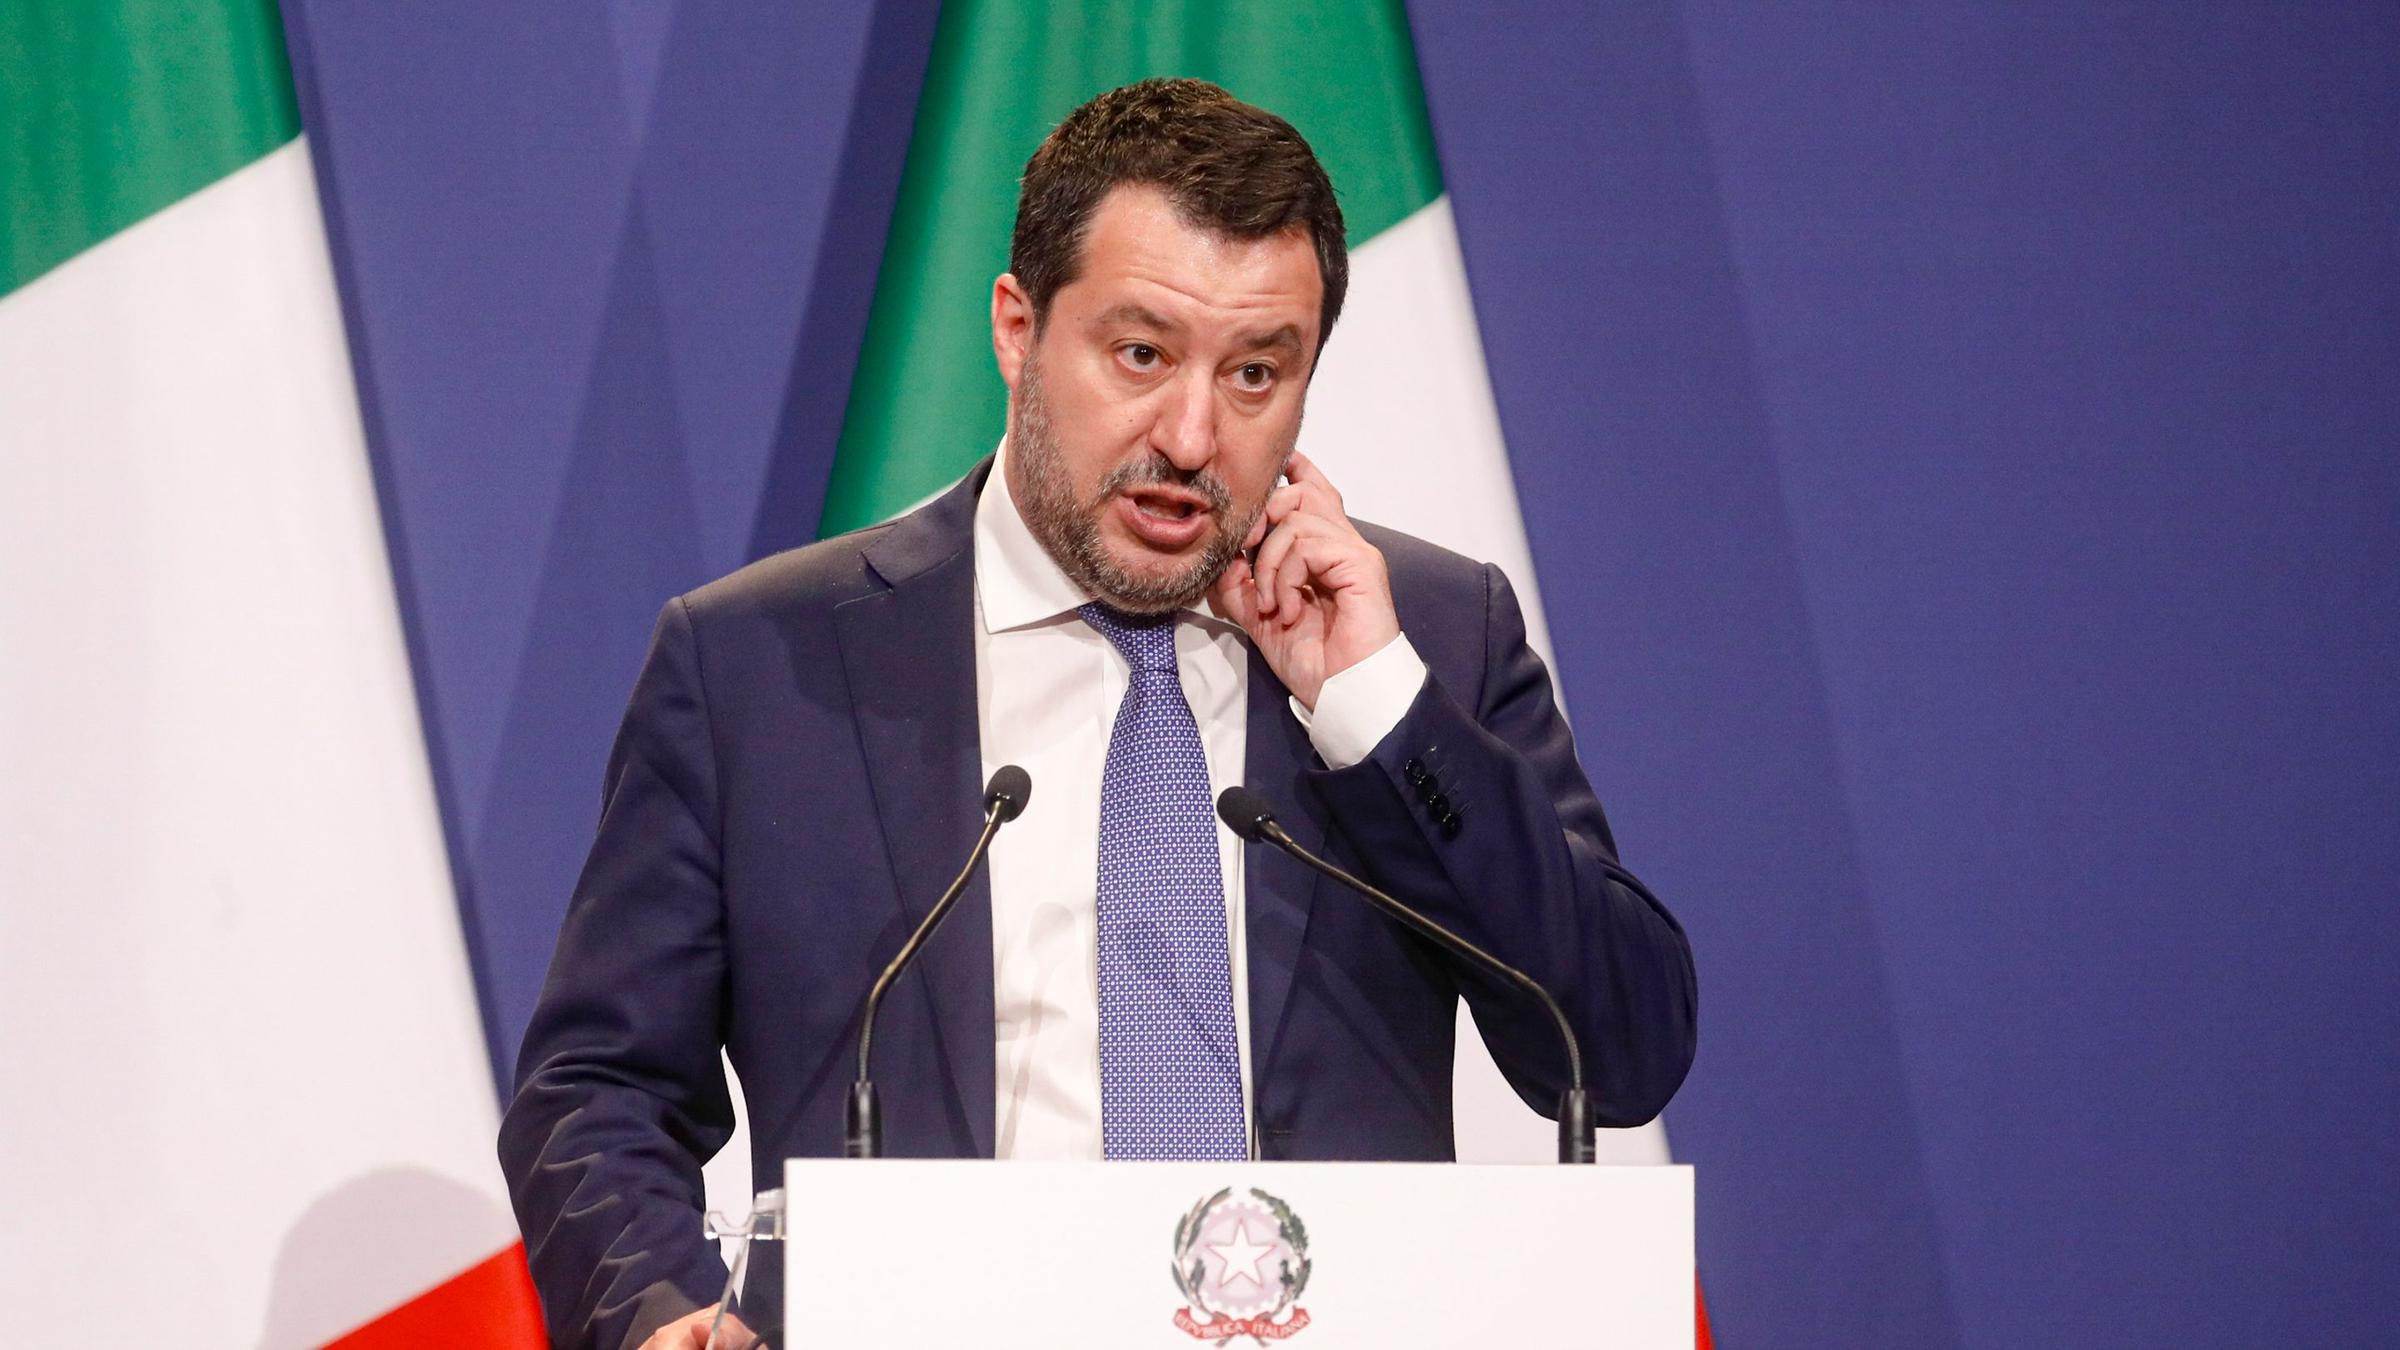 Matteo Salvini speaks at a press conference.